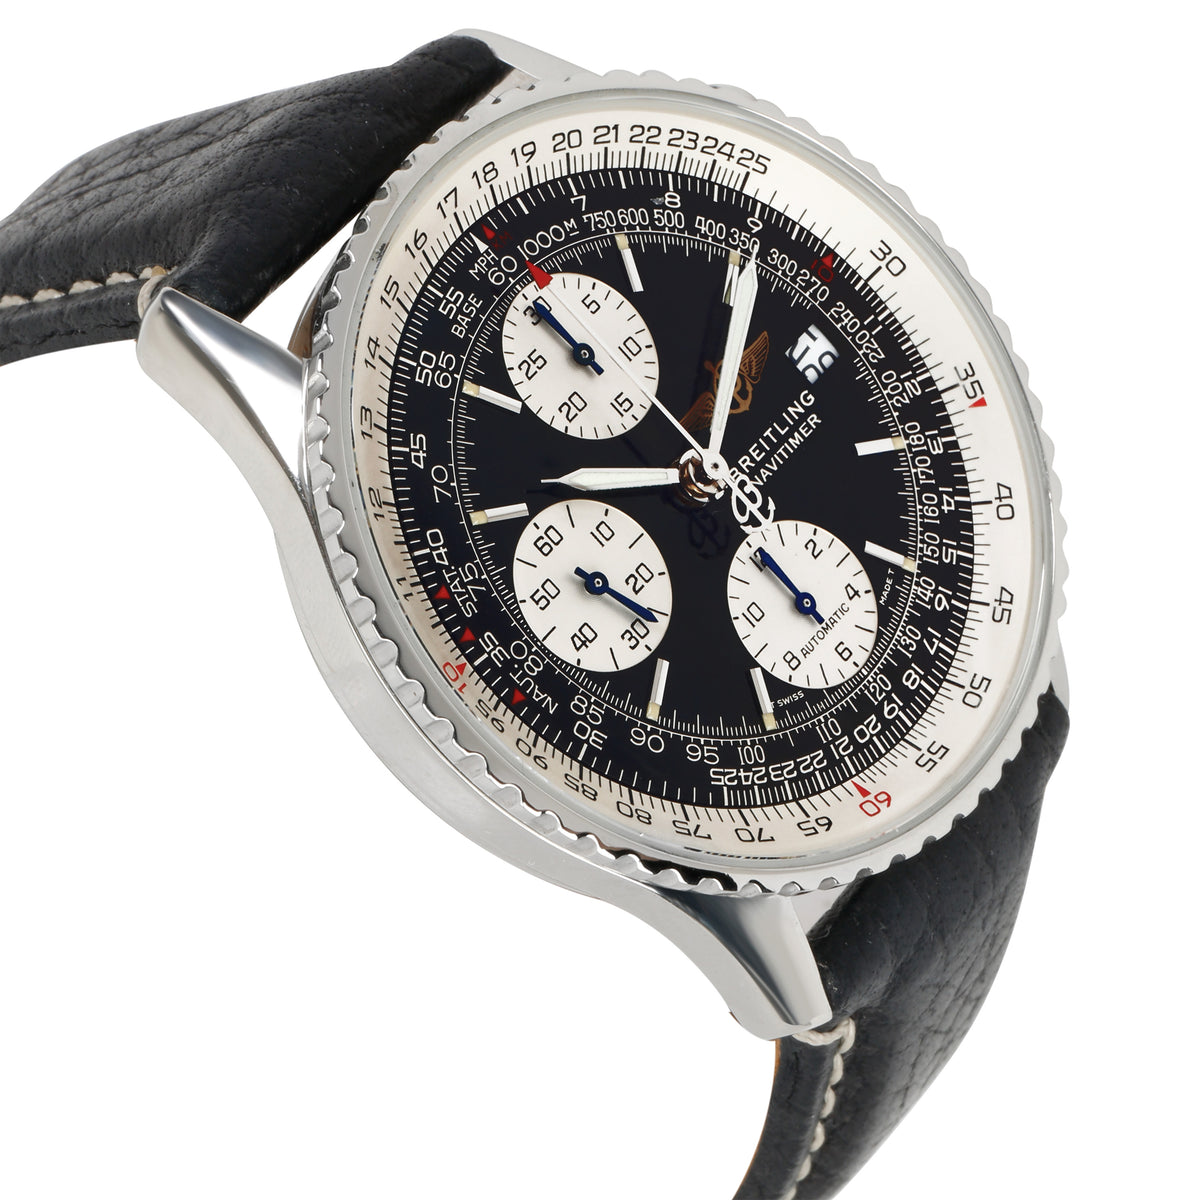 Breitling Old Navitimer II A13022 Men's Watch in  Stainless Steel